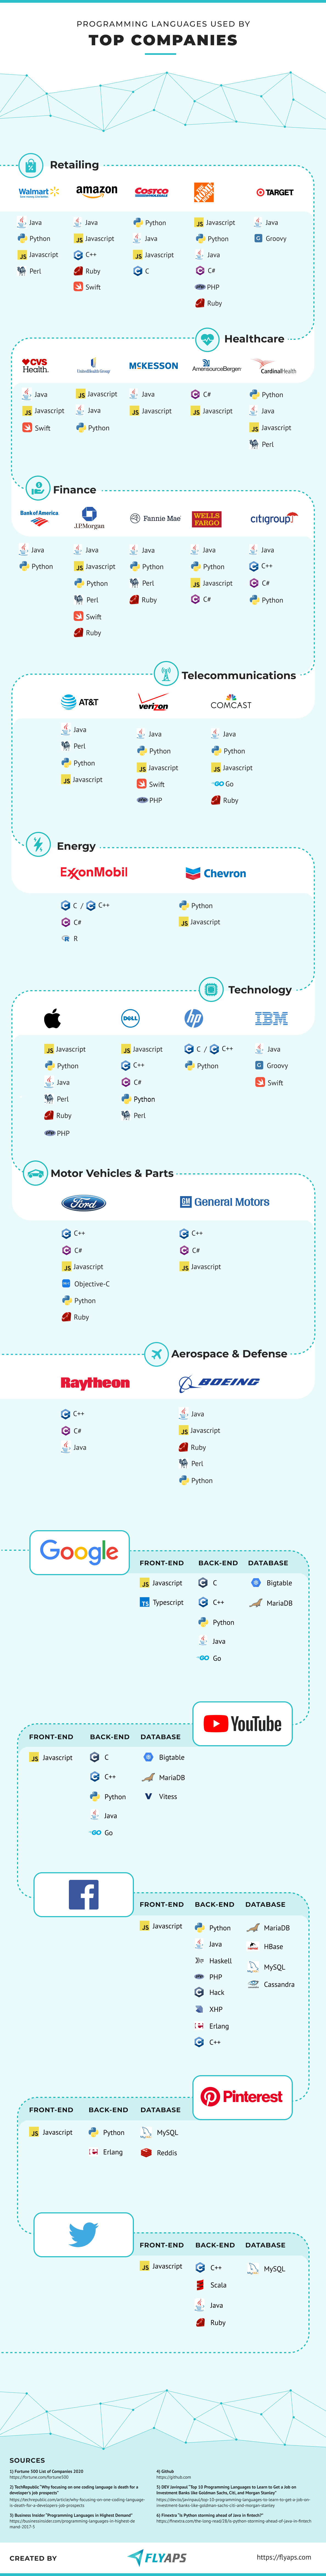 An infographic from Flyaps detailing the coding languages used by major companies.